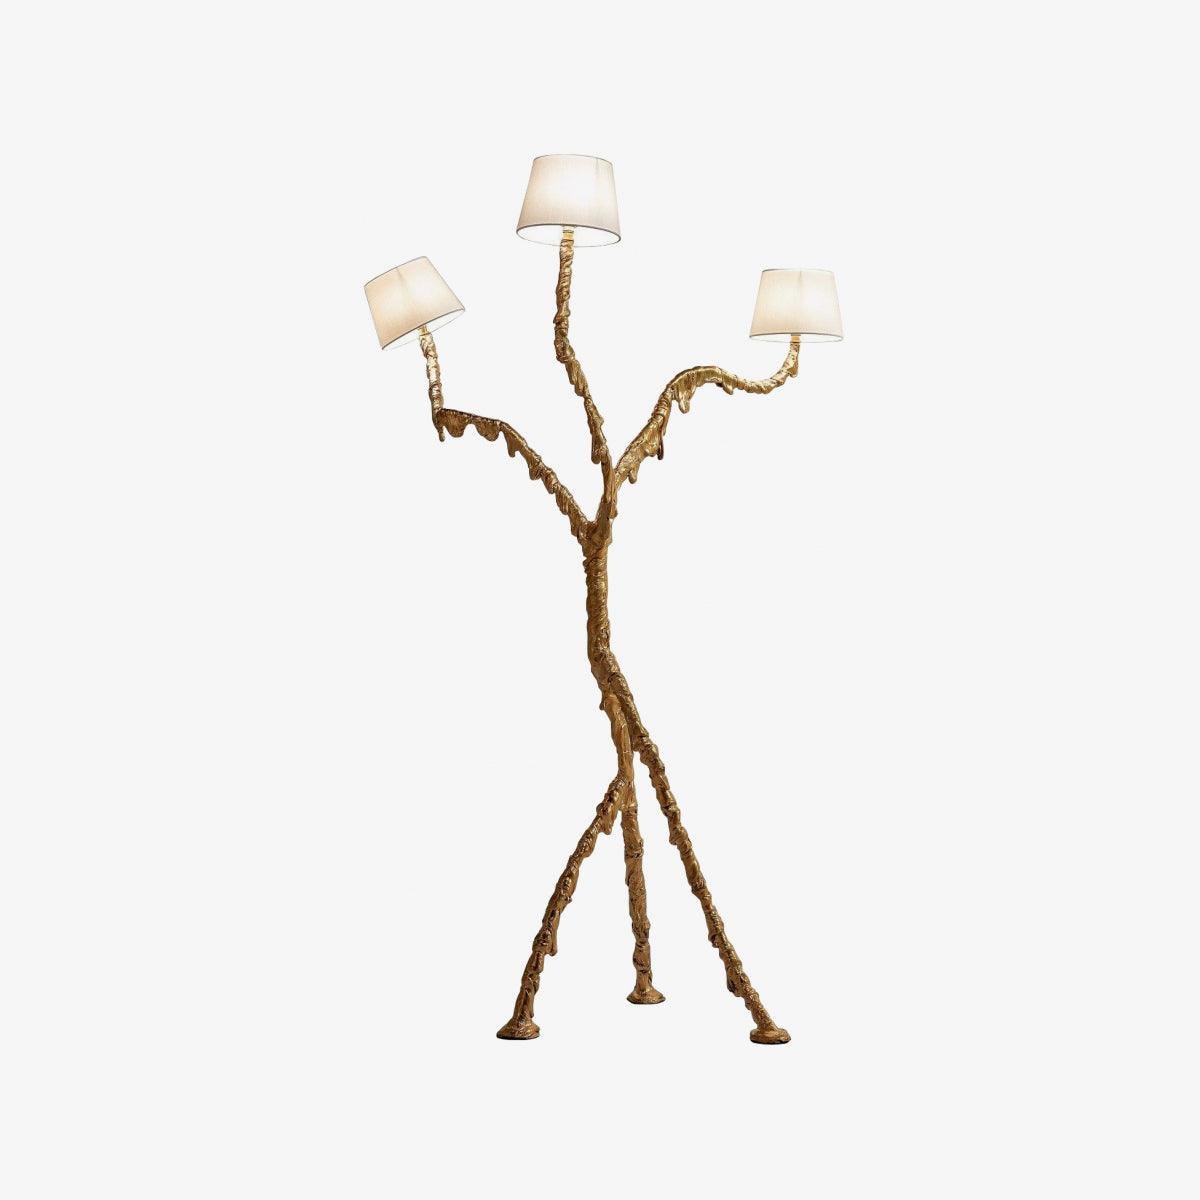 Brass Ines Floor Lamp with EU Plug, Diameter 31.5 inches x Height 78.7 inches (80cm x 200cm)